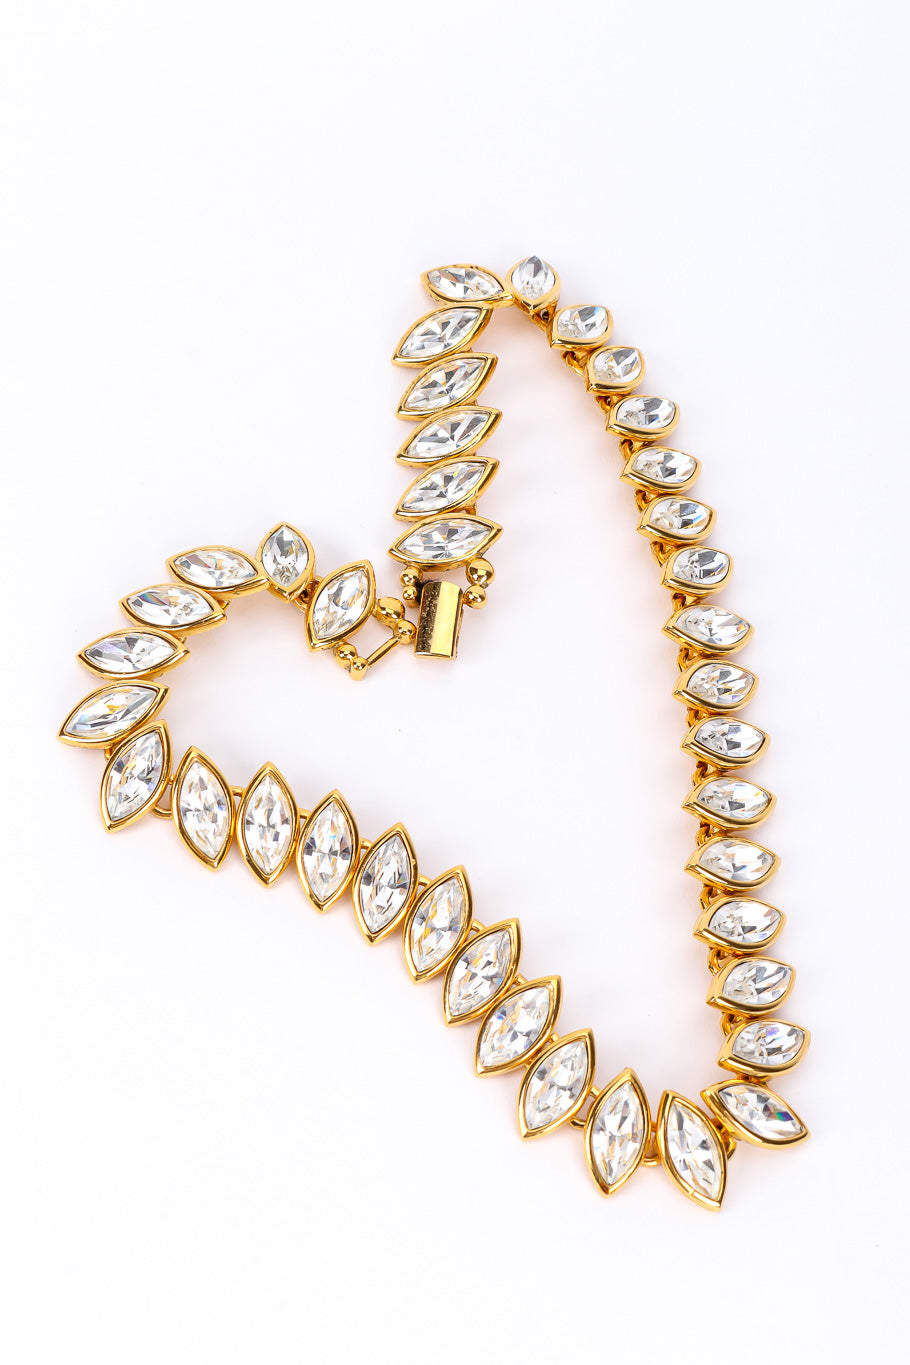 Vintage Napier Crystal Marquise Collar Necklace full front view @Recessla